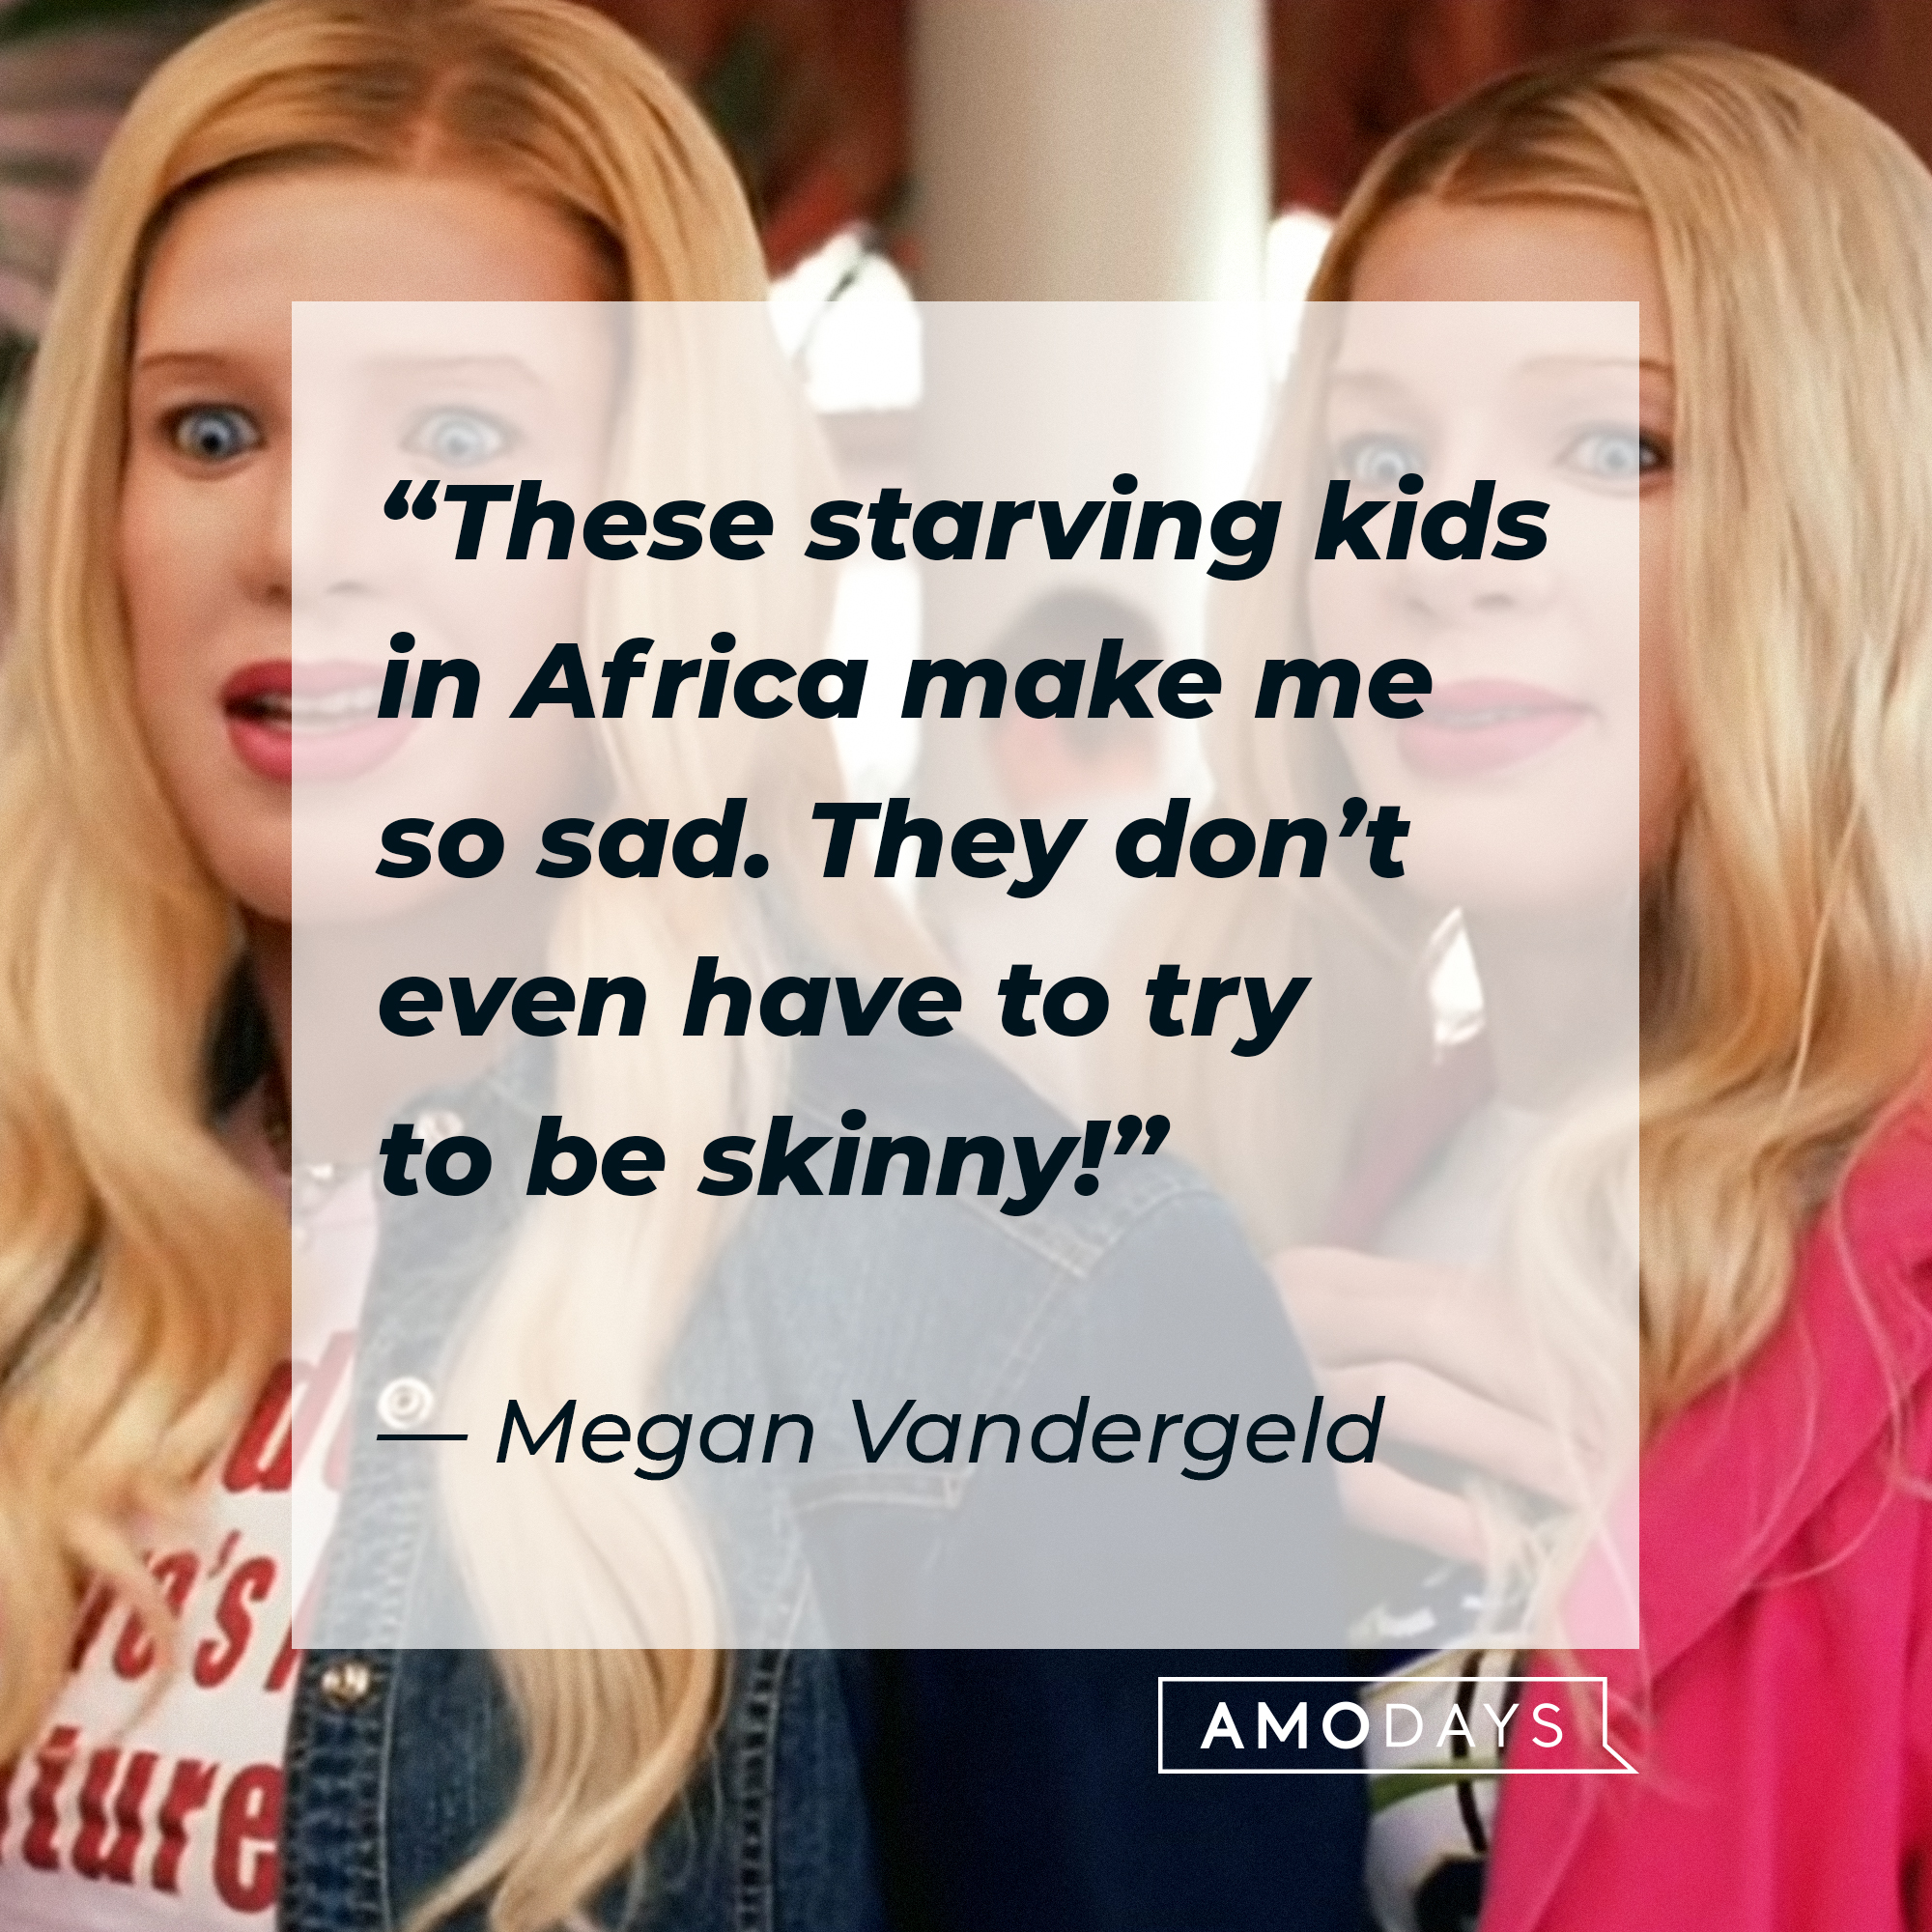 Marcus and Kevin Copeland in their undercover disguises with  Megan Vandergeld’s quote: “These starving kids in Africa make me so sad. They don’t even have to try to be skinny!” | Source: Sony Pictures Entertainment